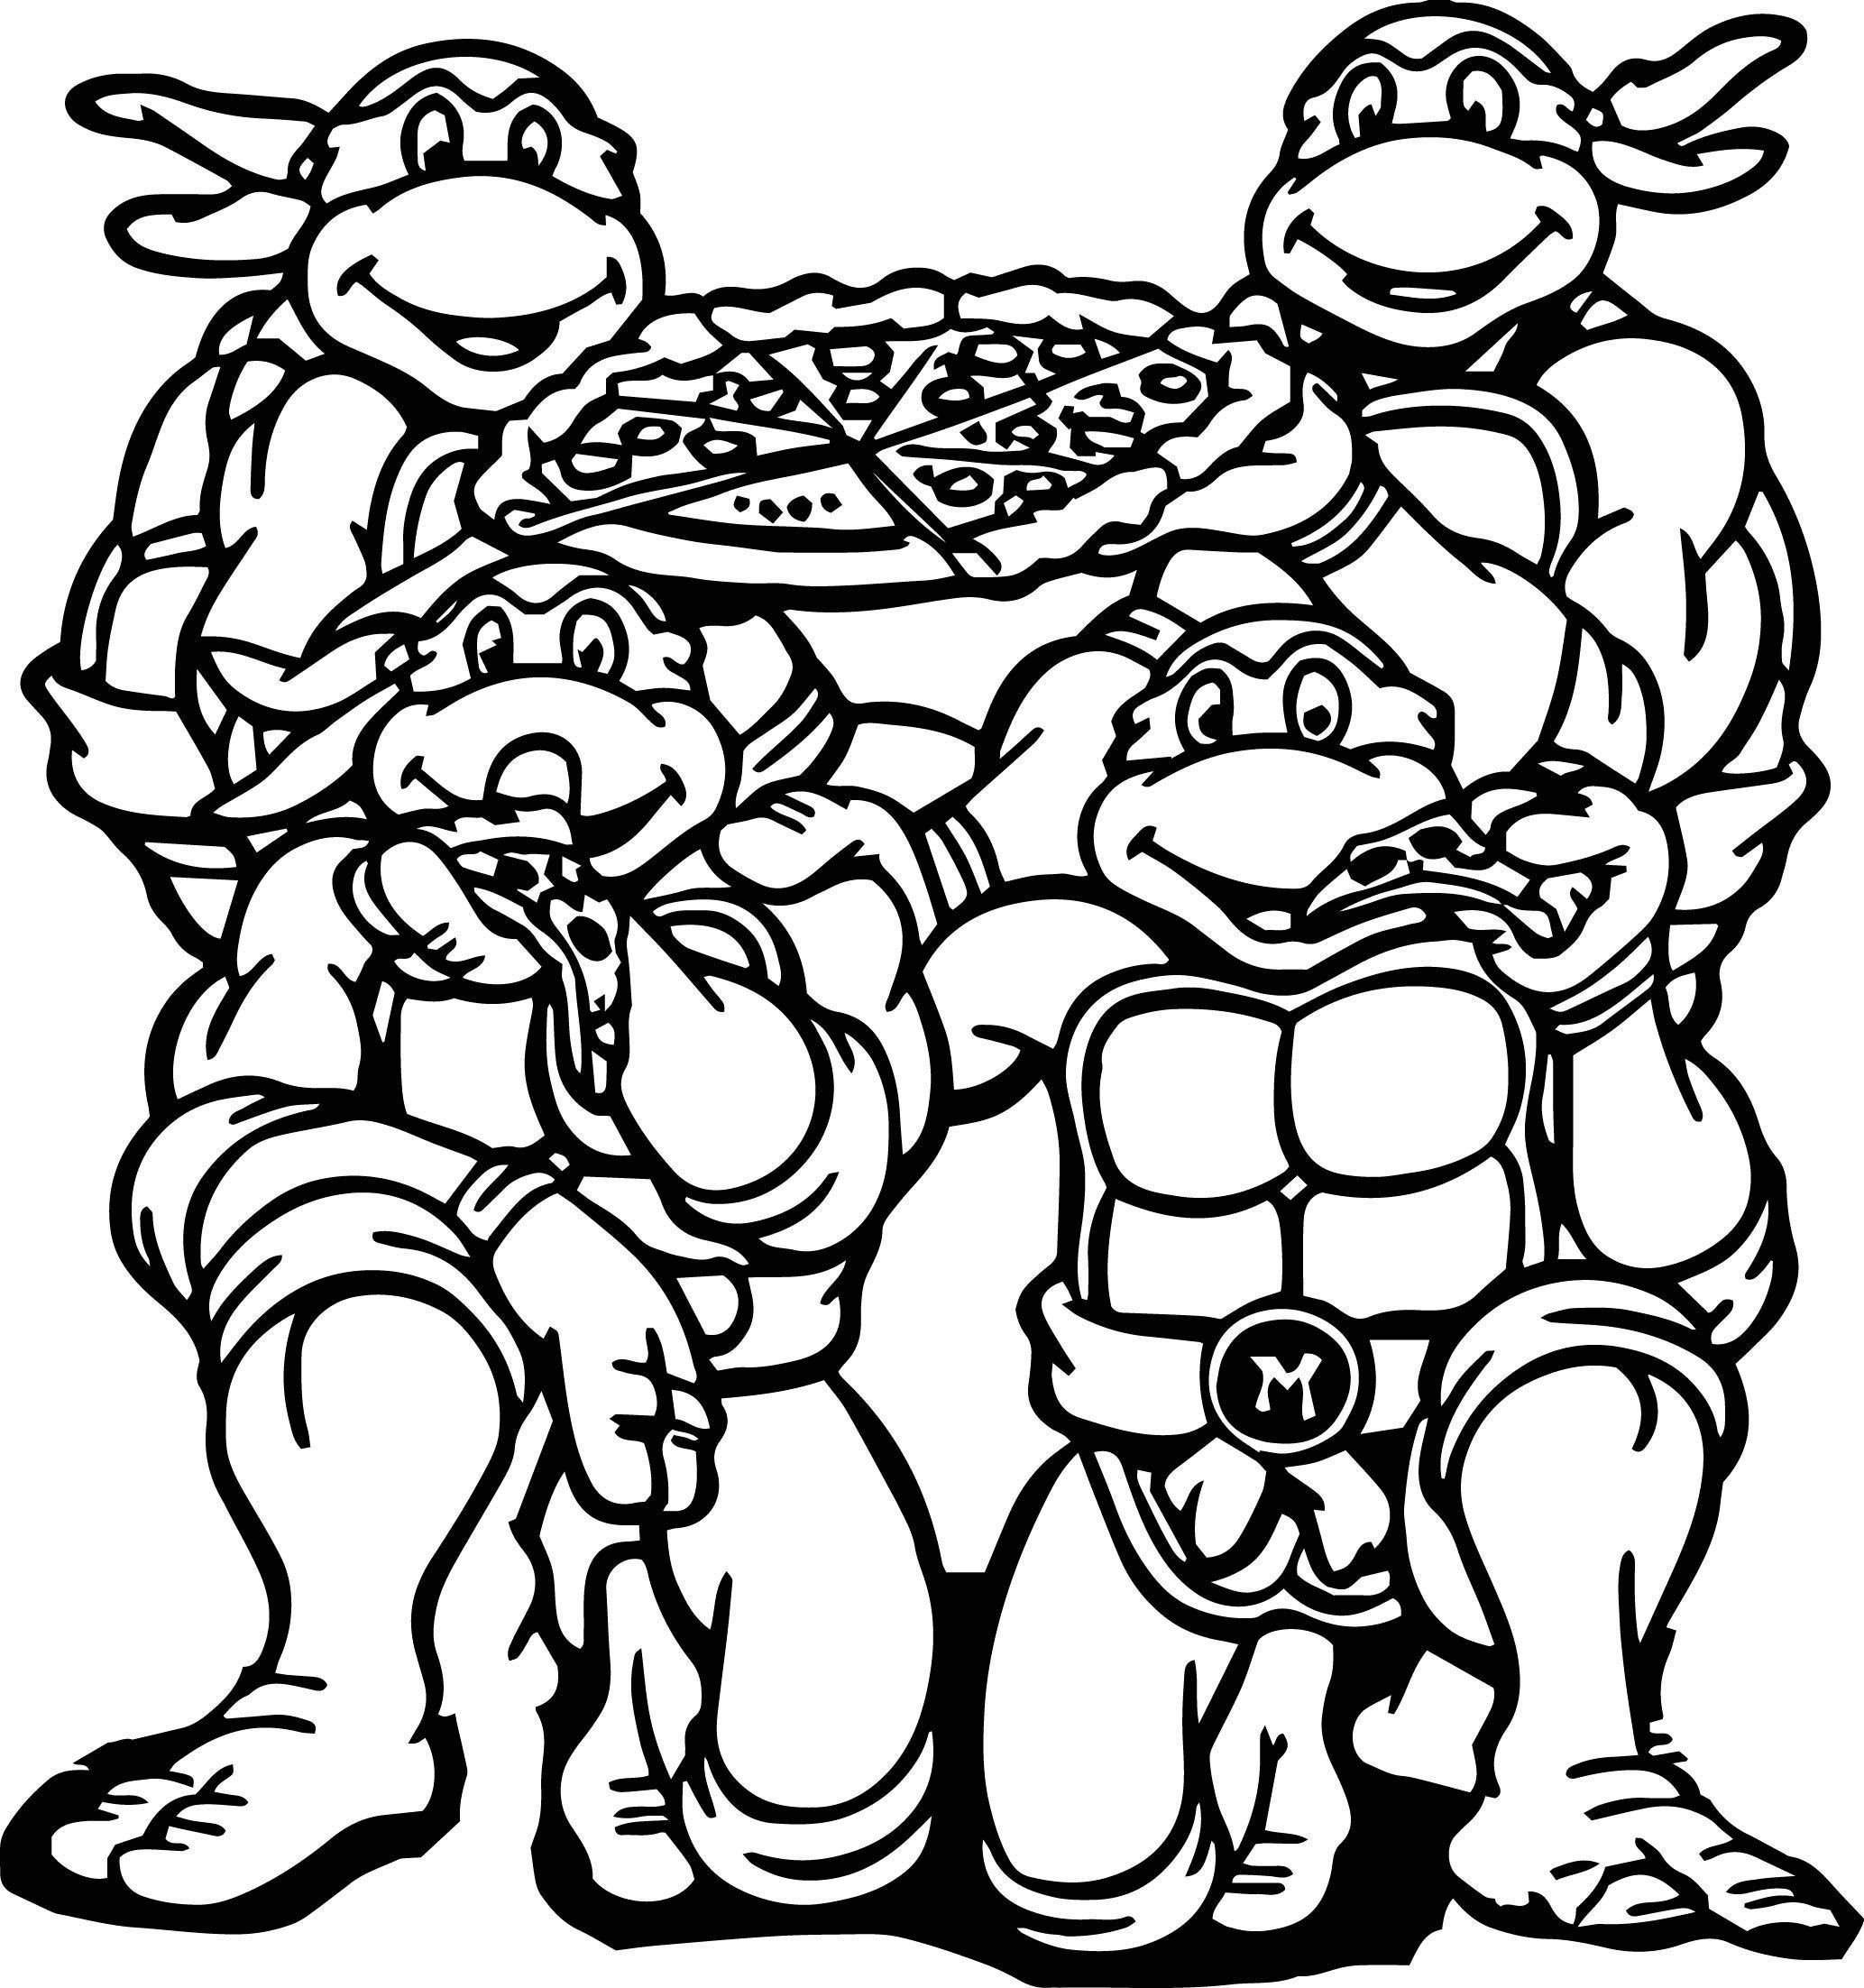 Lego ninja turtles coloring pages